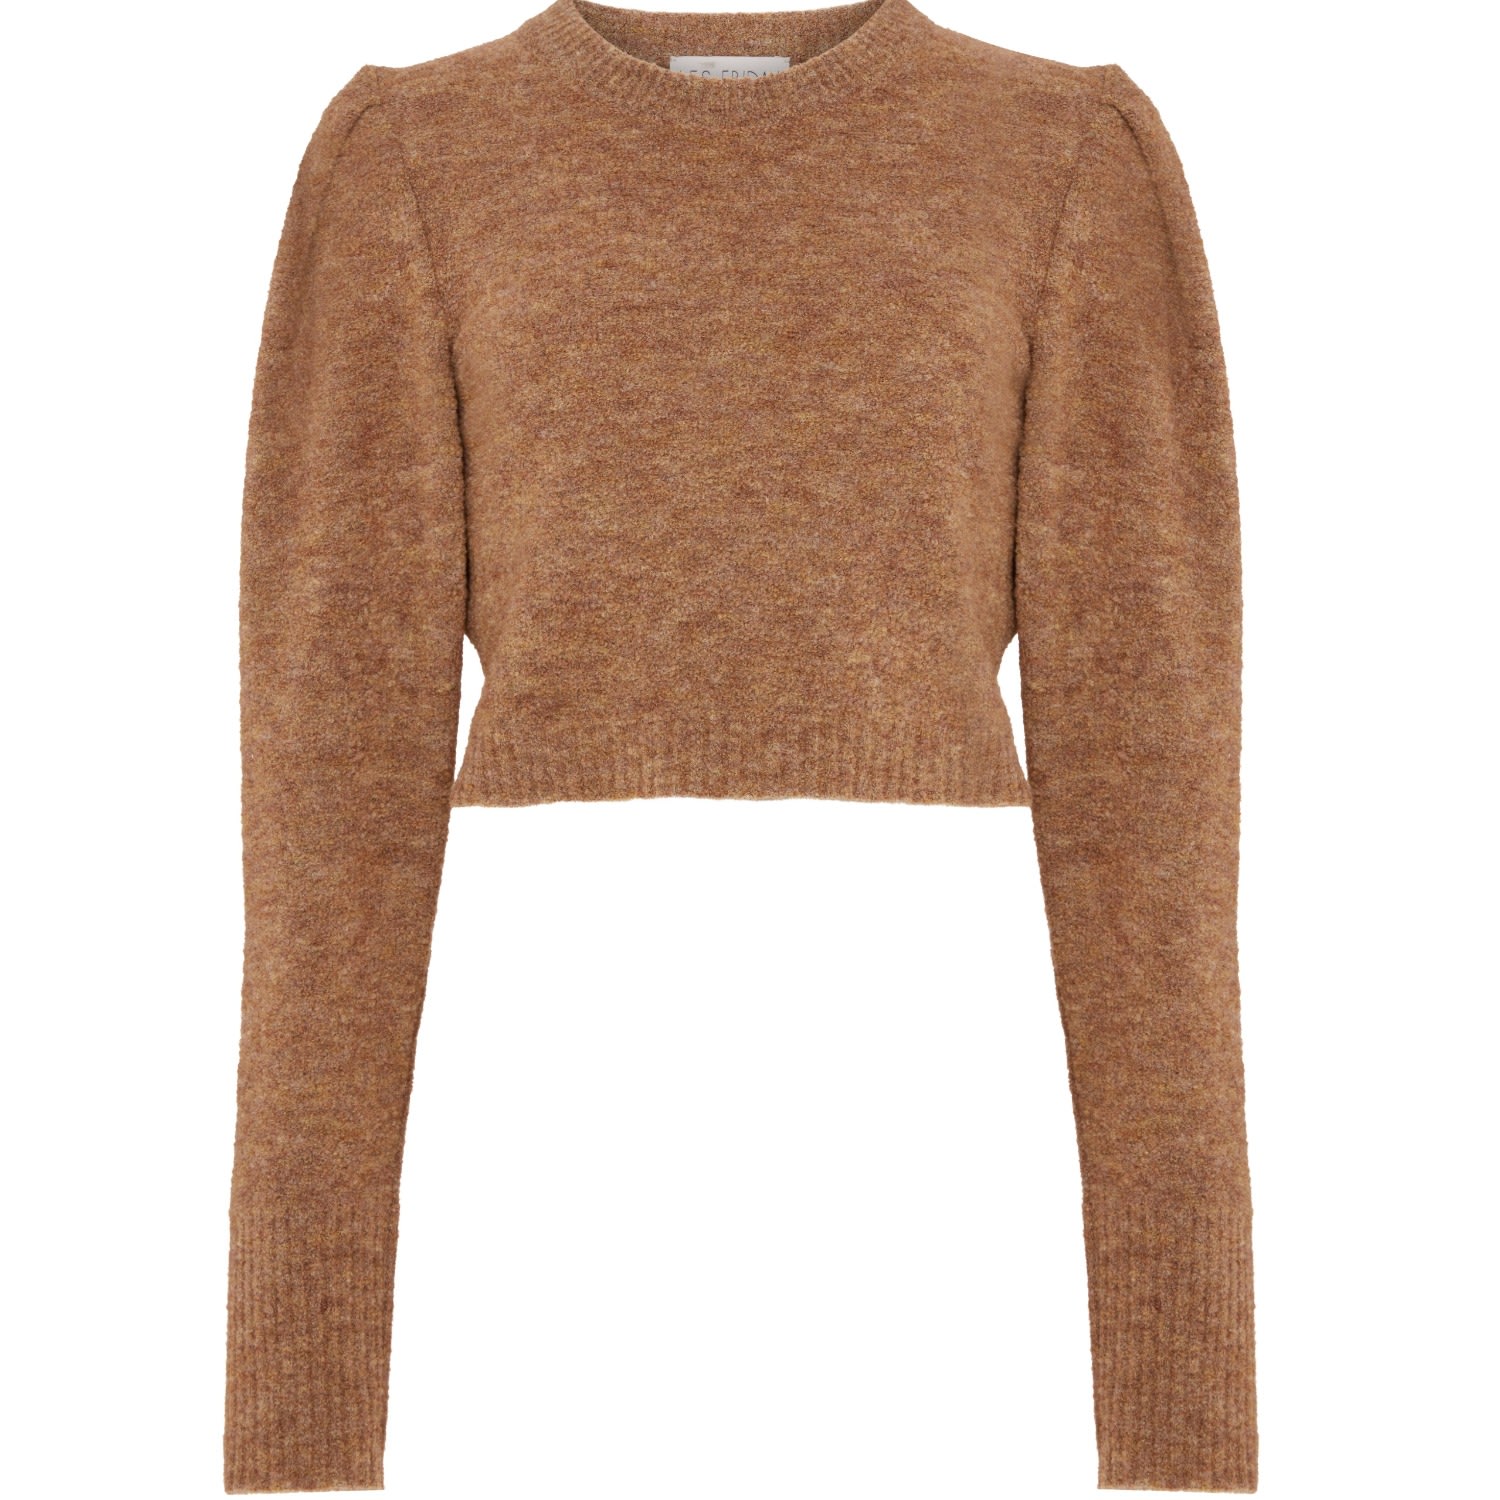 Women’s Mila Cropped Merino Wool Sweater - Camel Brown Small Les Friday